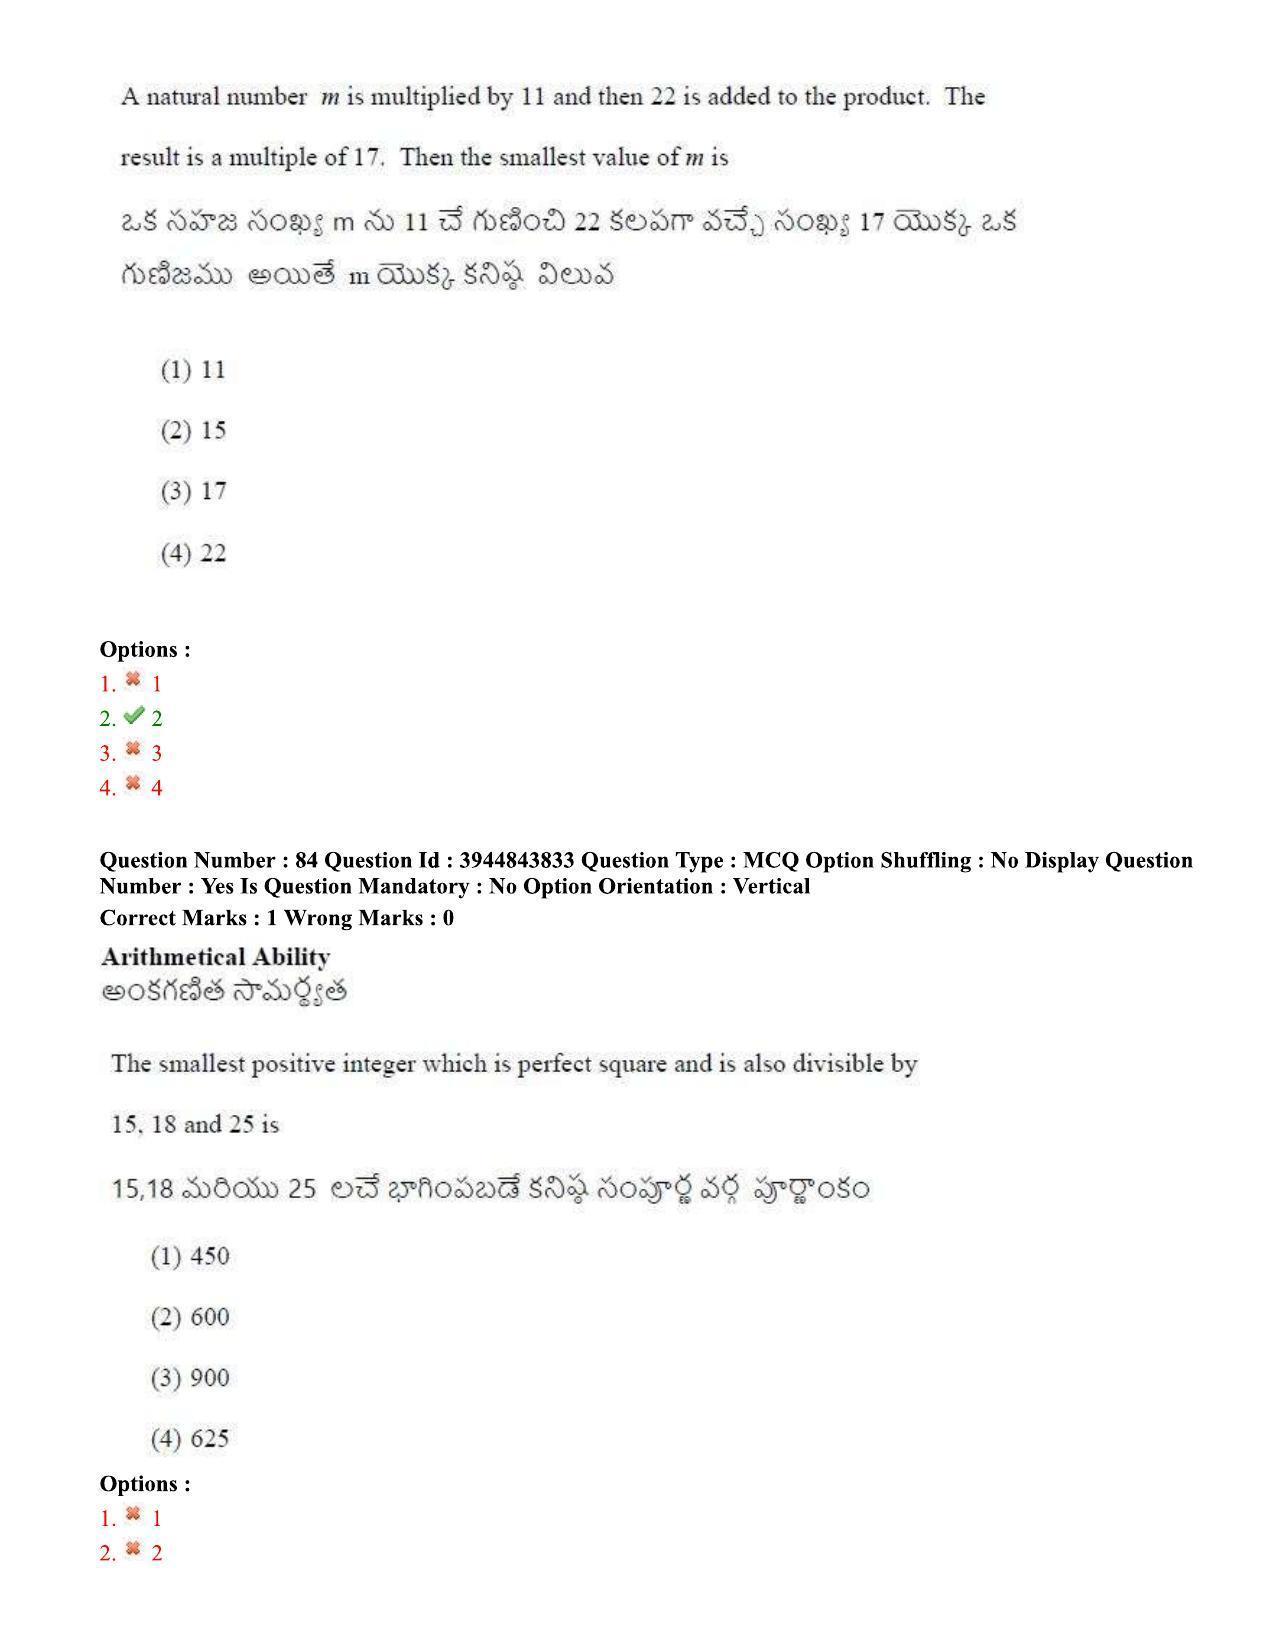 TS ICET 2020 Question Paper 1 - Oct 1, 2020	 - Page 64